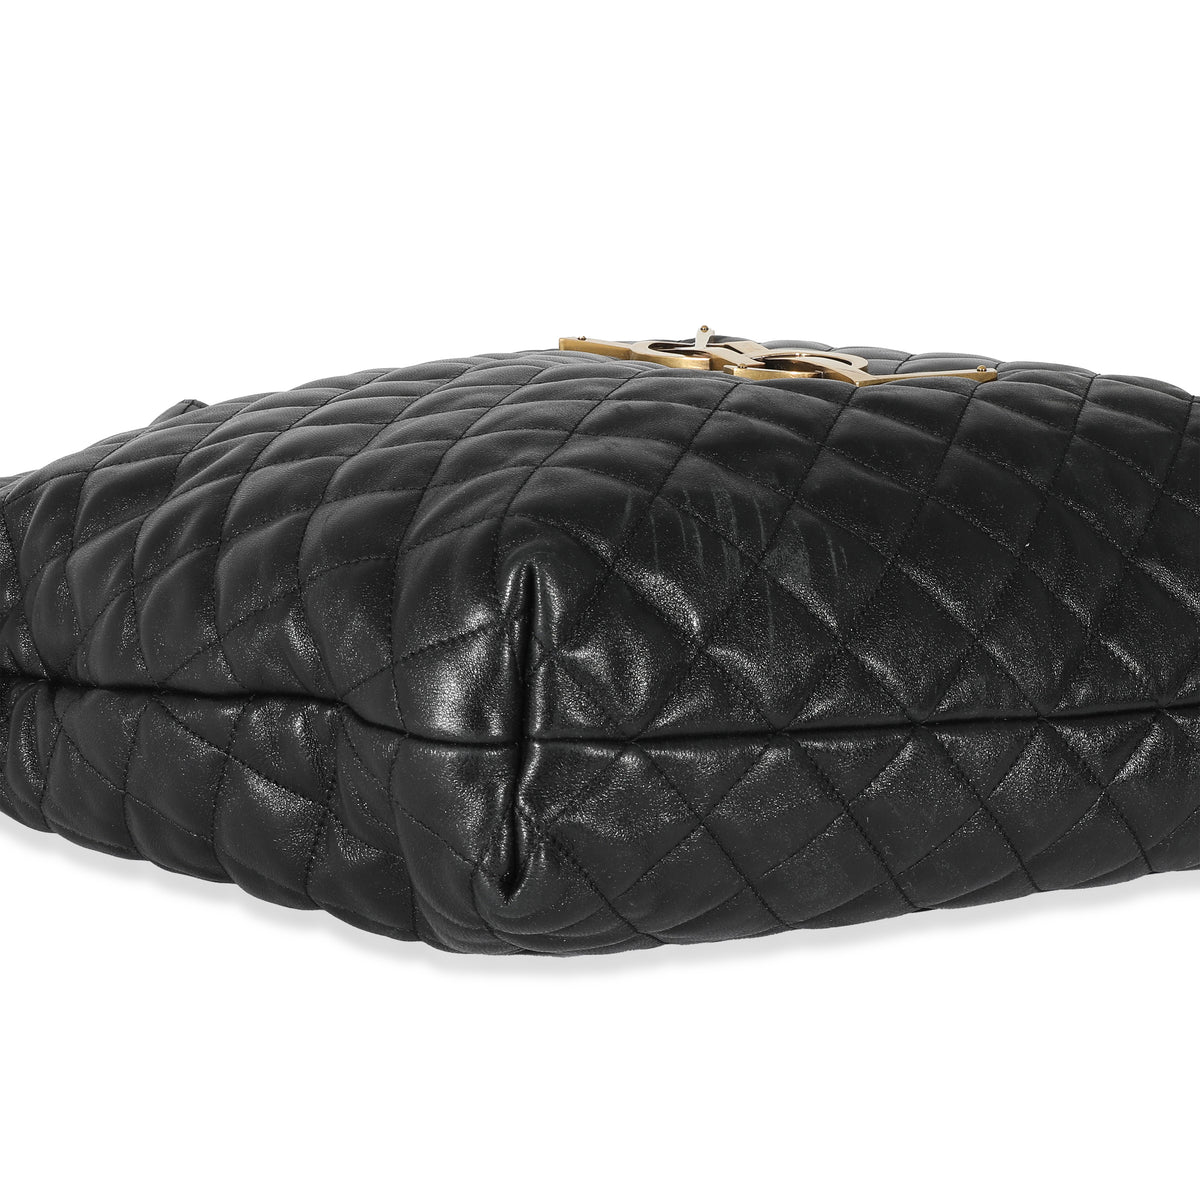 SAINT LAURENT ICARE MAXI SHOPPING BAG IN QUILTED LAMBSKIN